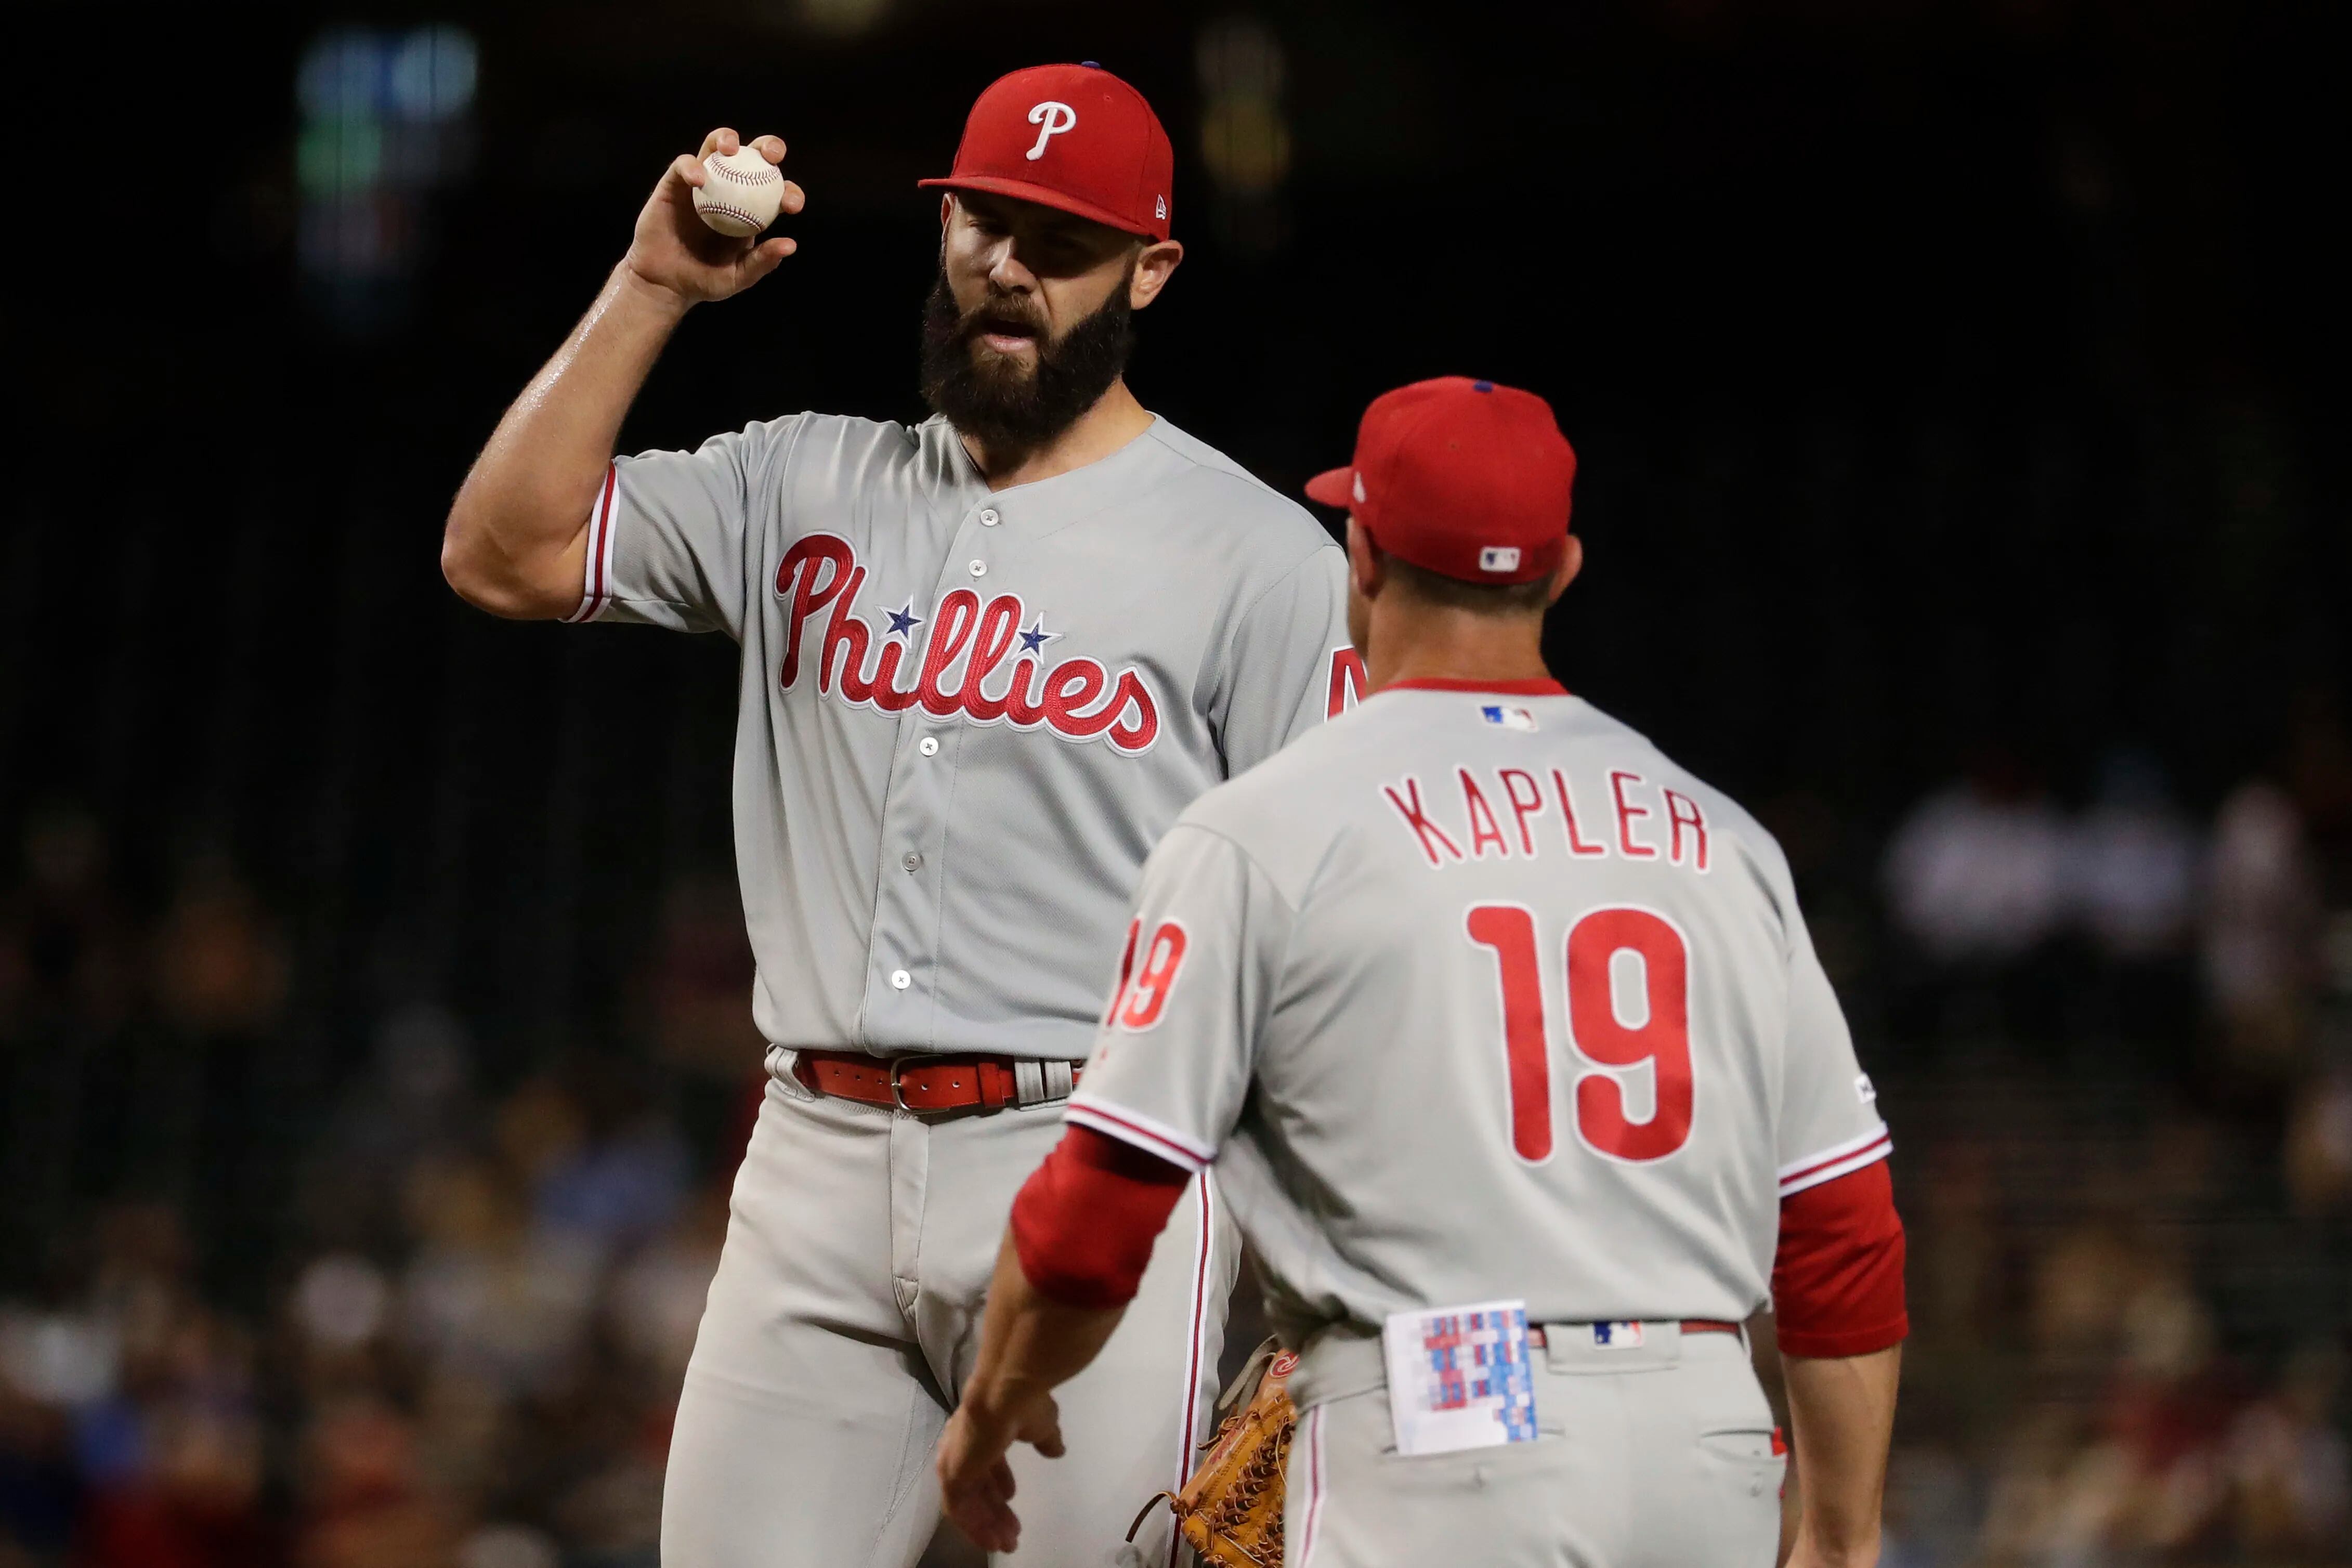 The Phillies signed Jake Arrieta and are now a popular playoff